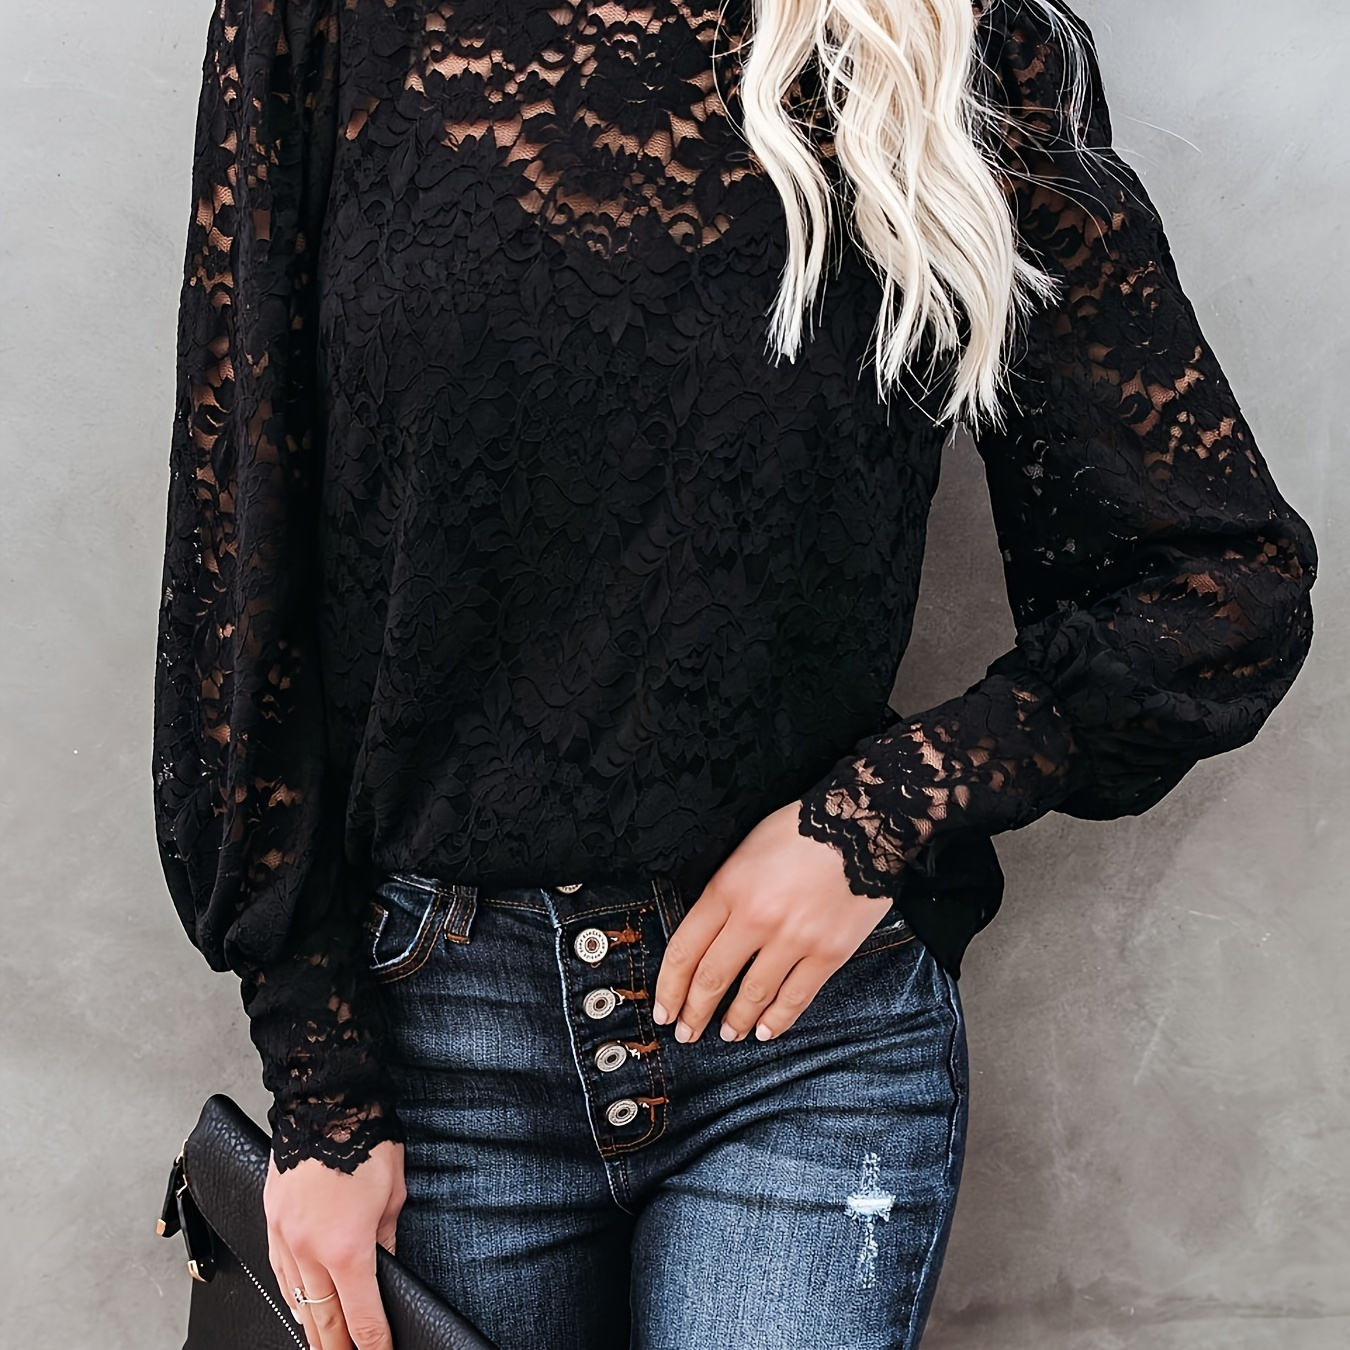 

Floral Pattern Mock Neck T-shirt, Elegant Solid Long Sleeve Semi-sheer Lace Top For Spring & Fall, Women's Clothing